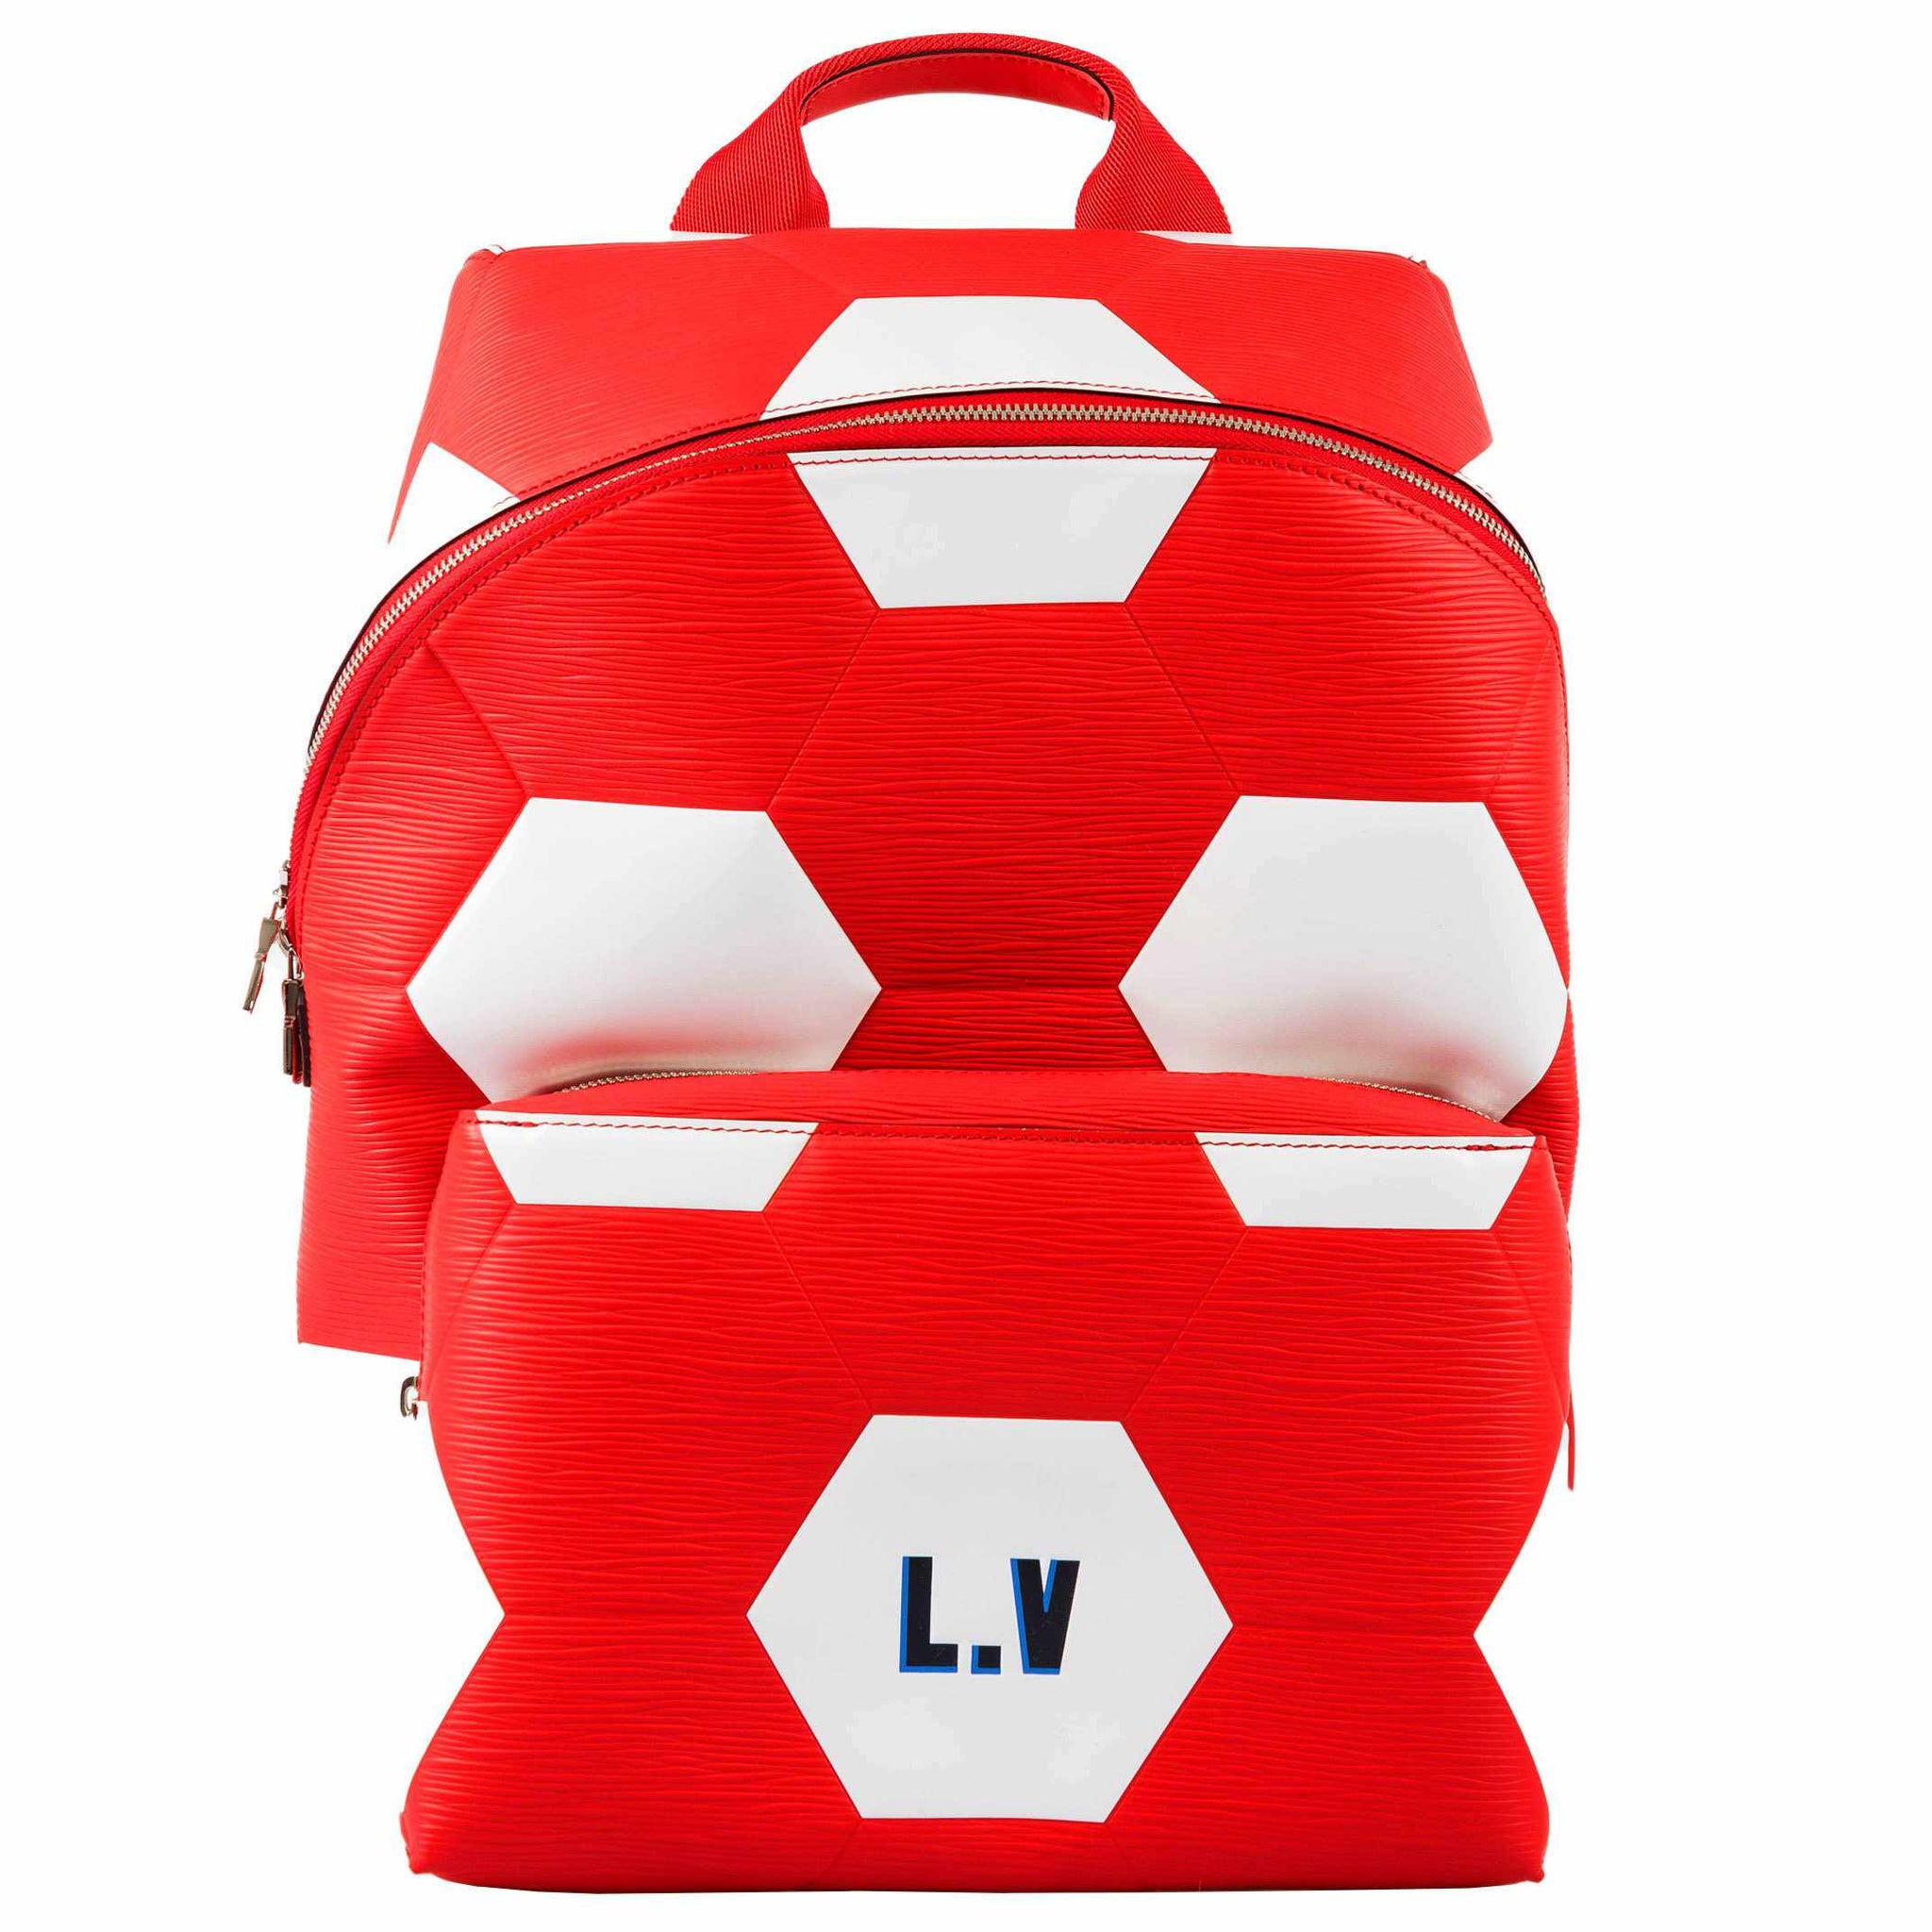 A LIMITED EDITION BLACK EPI LEATHER FIFA WORLD CUP APOLLO BACKPACK